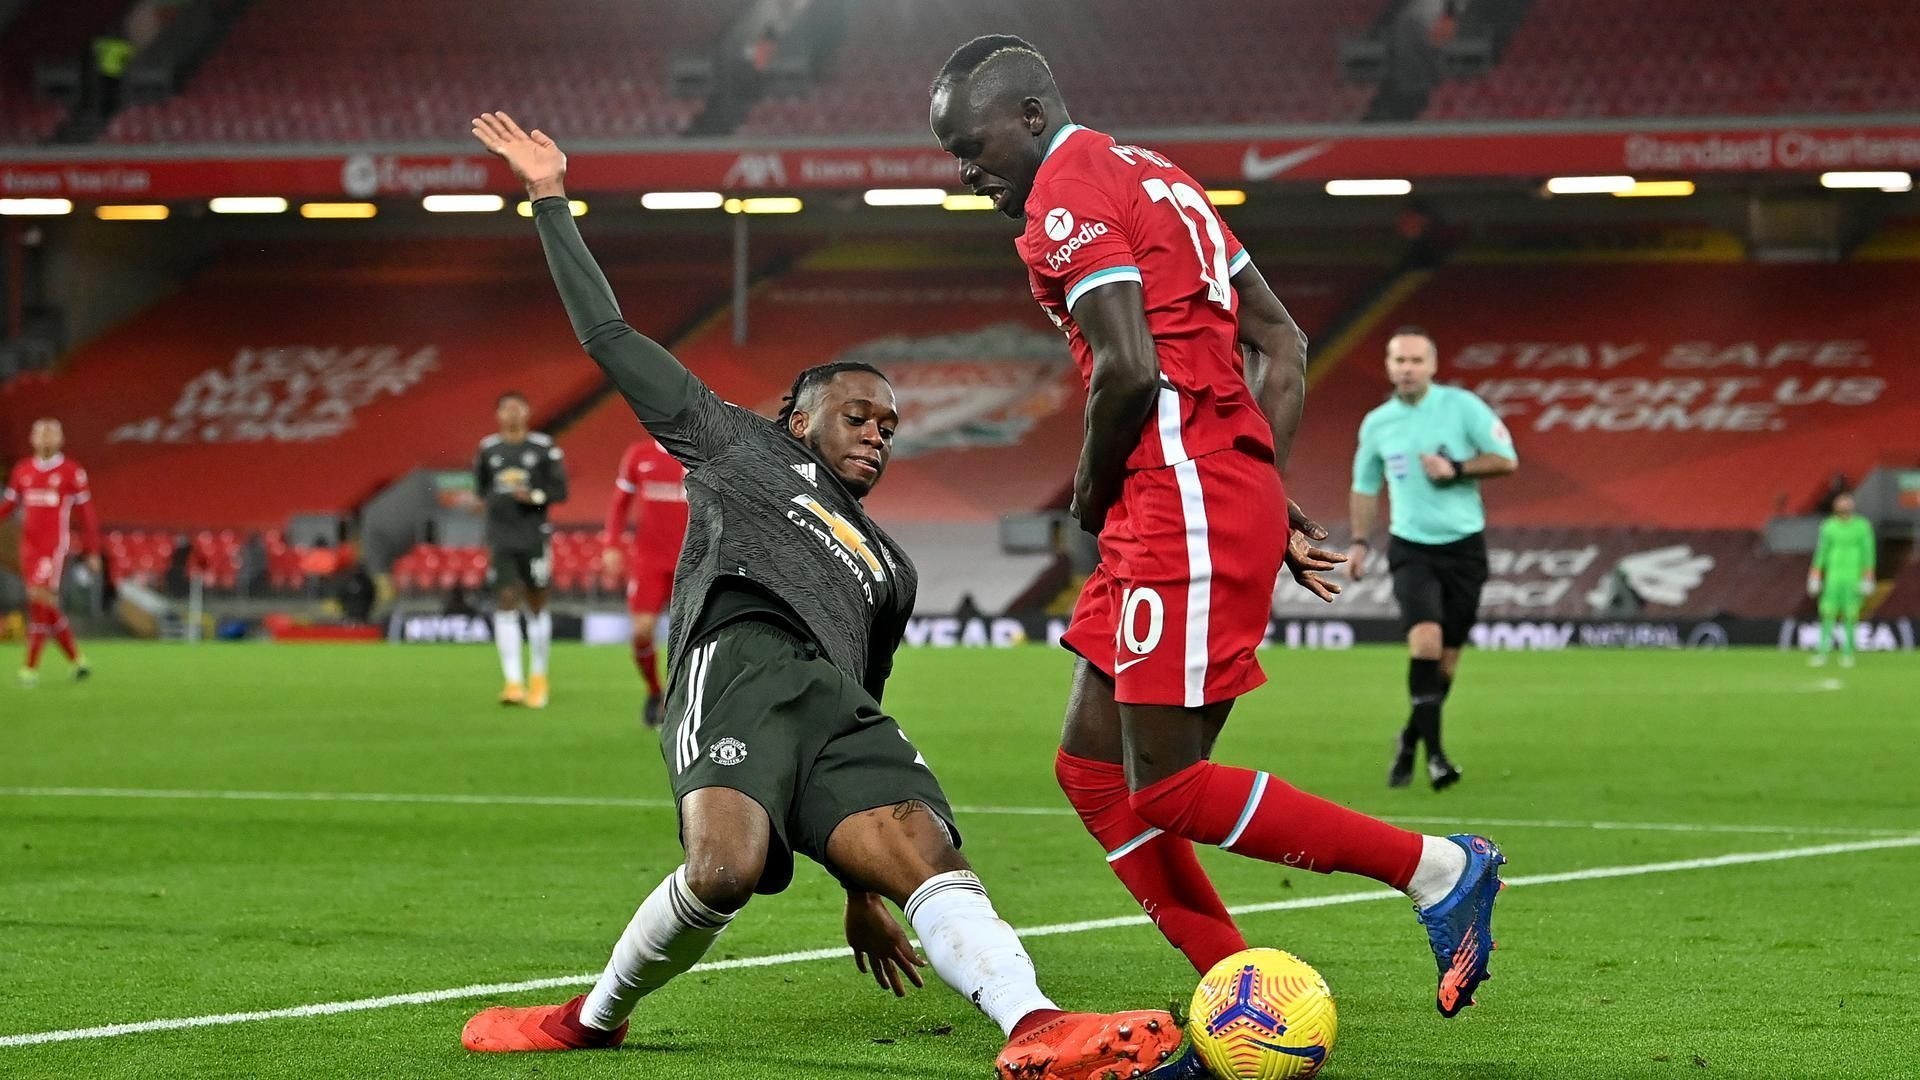 Wan-Bissaka will face the strongest version of Mane yet.